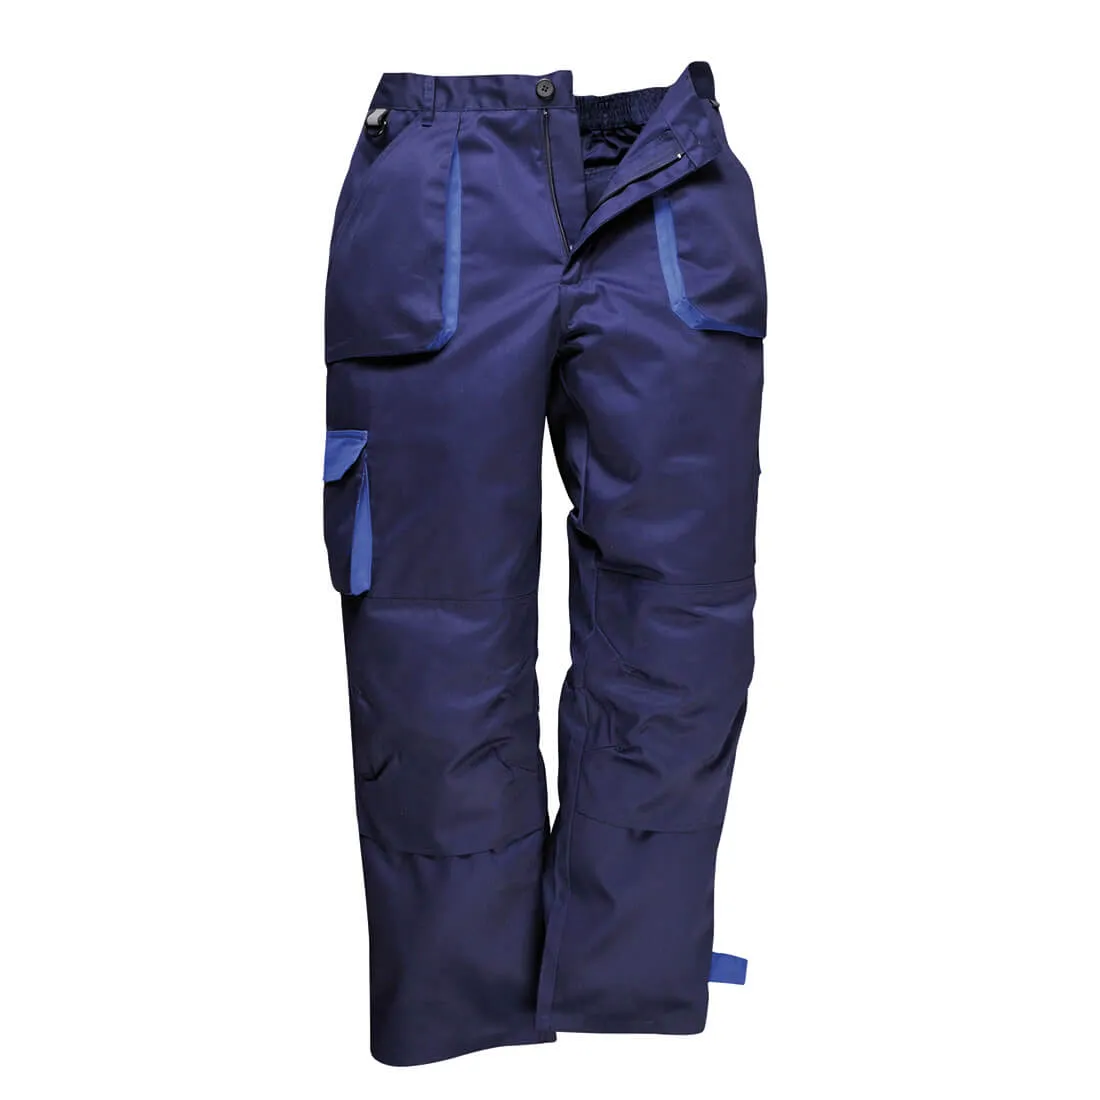 Portwest TX16 Contrast Lined Trousers - Navy, 2XL